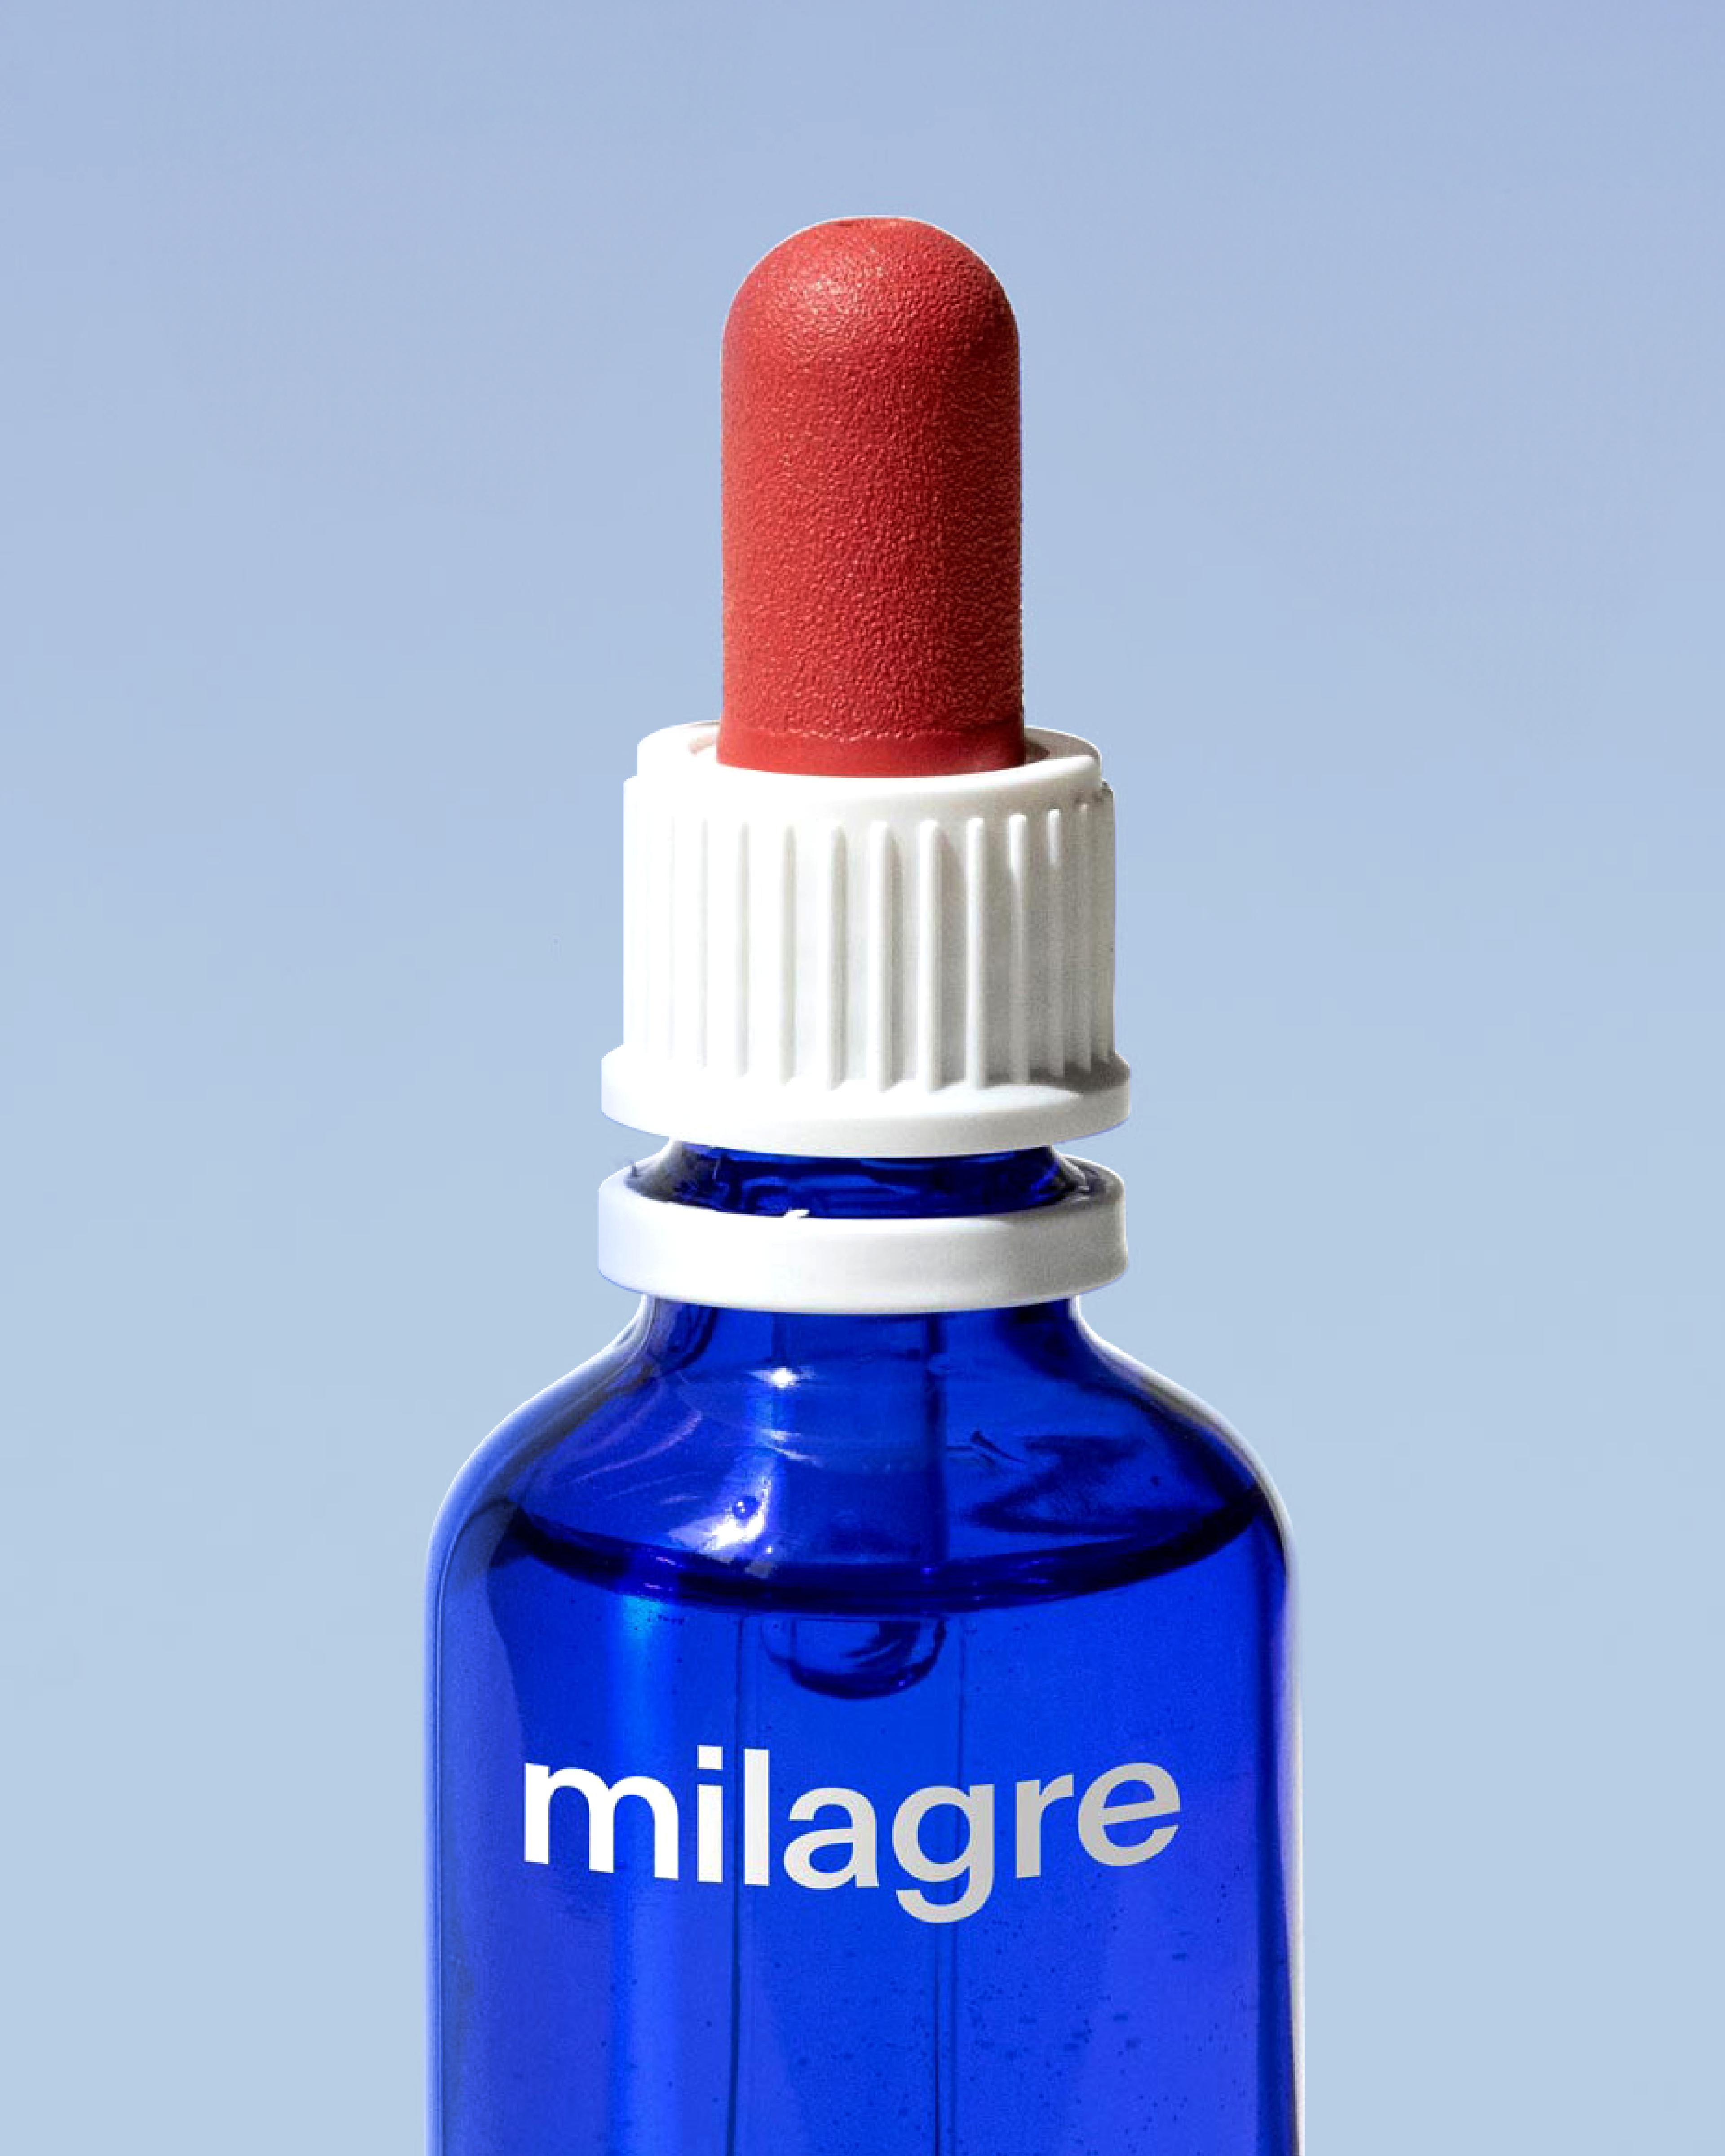 Photo of a Milagre product